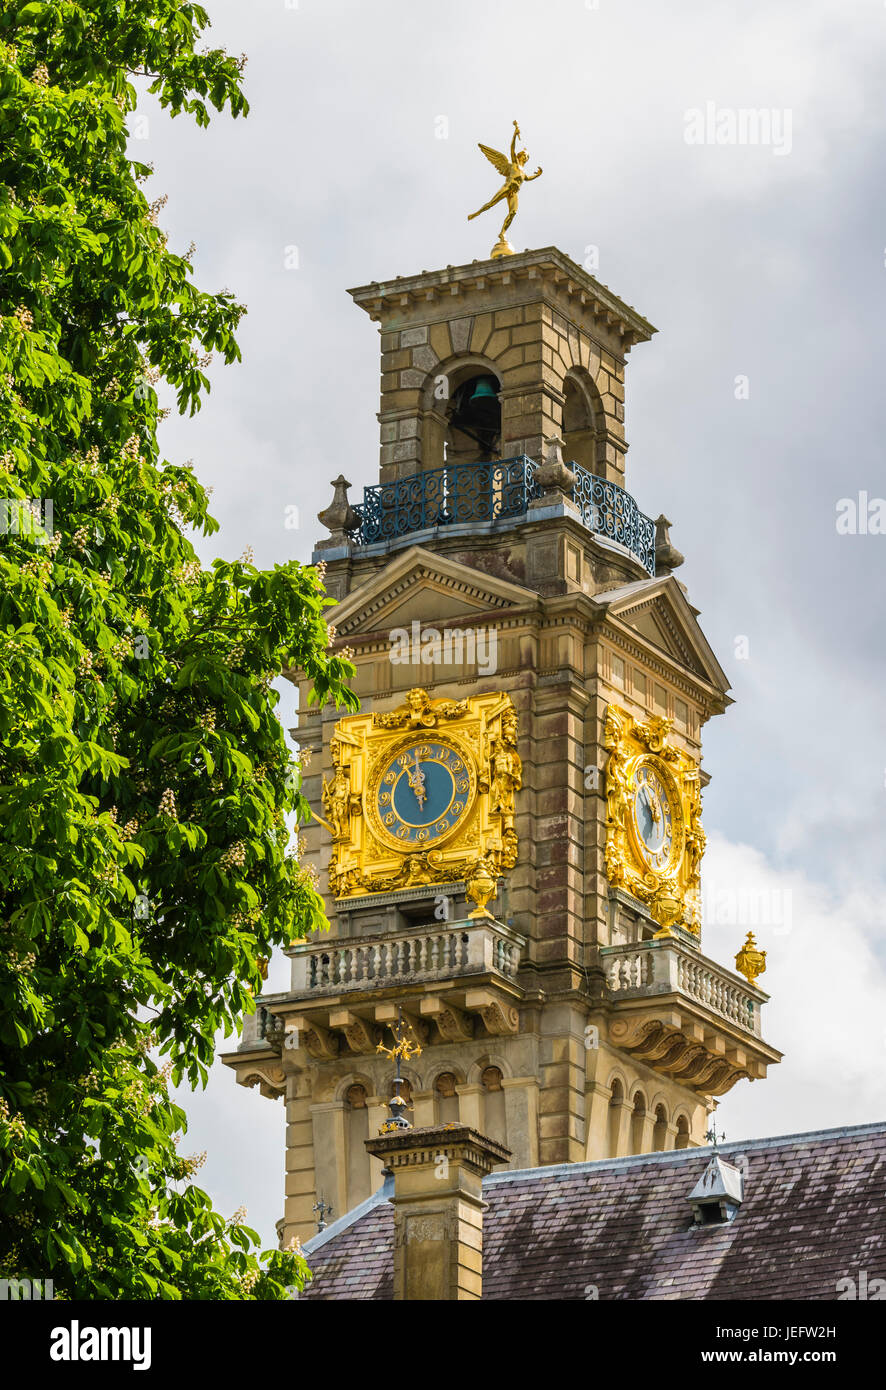 Clock tower at Cliveden, Buckinghamshire, UK Stock Photo